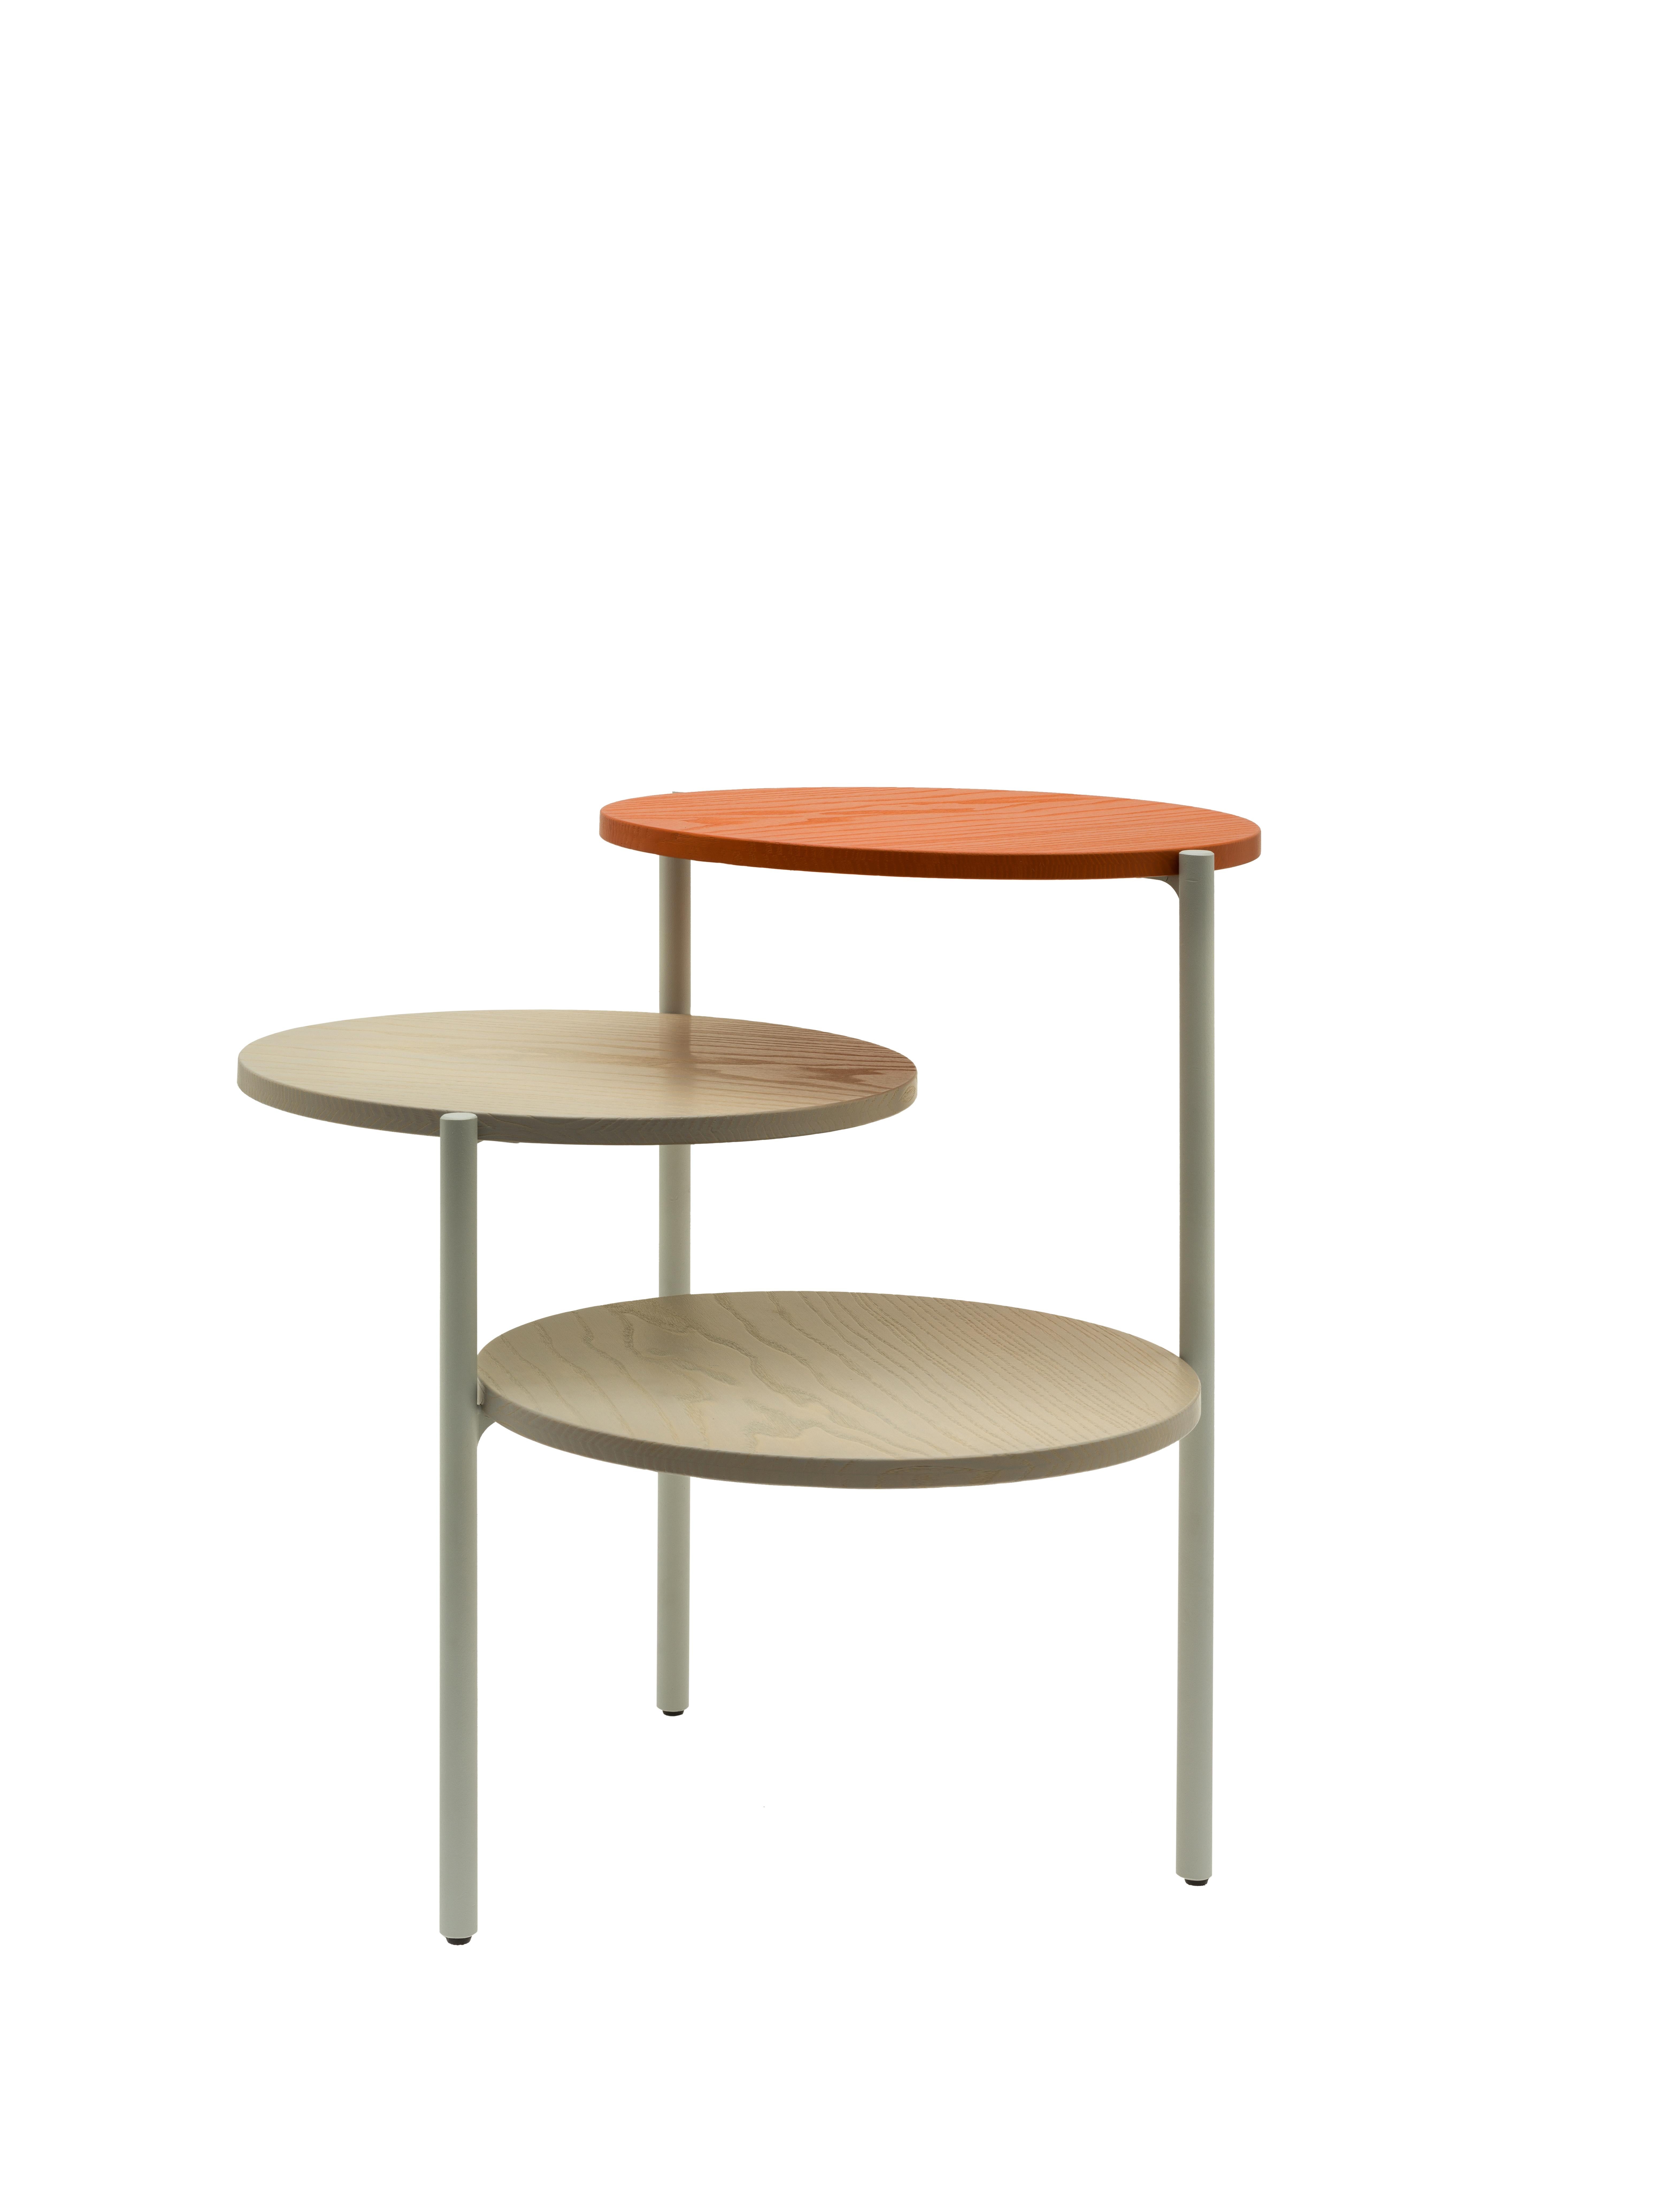 Pair of grey & pumpkin triplo tables by Mason Editions
Dimensions: 54 × 54 × 52.5 cm
Materials: iron, ash
Colours: total black, total blue, total light grey, blue + coral, black + light grey, light grey + pumpkin

This side table is based on